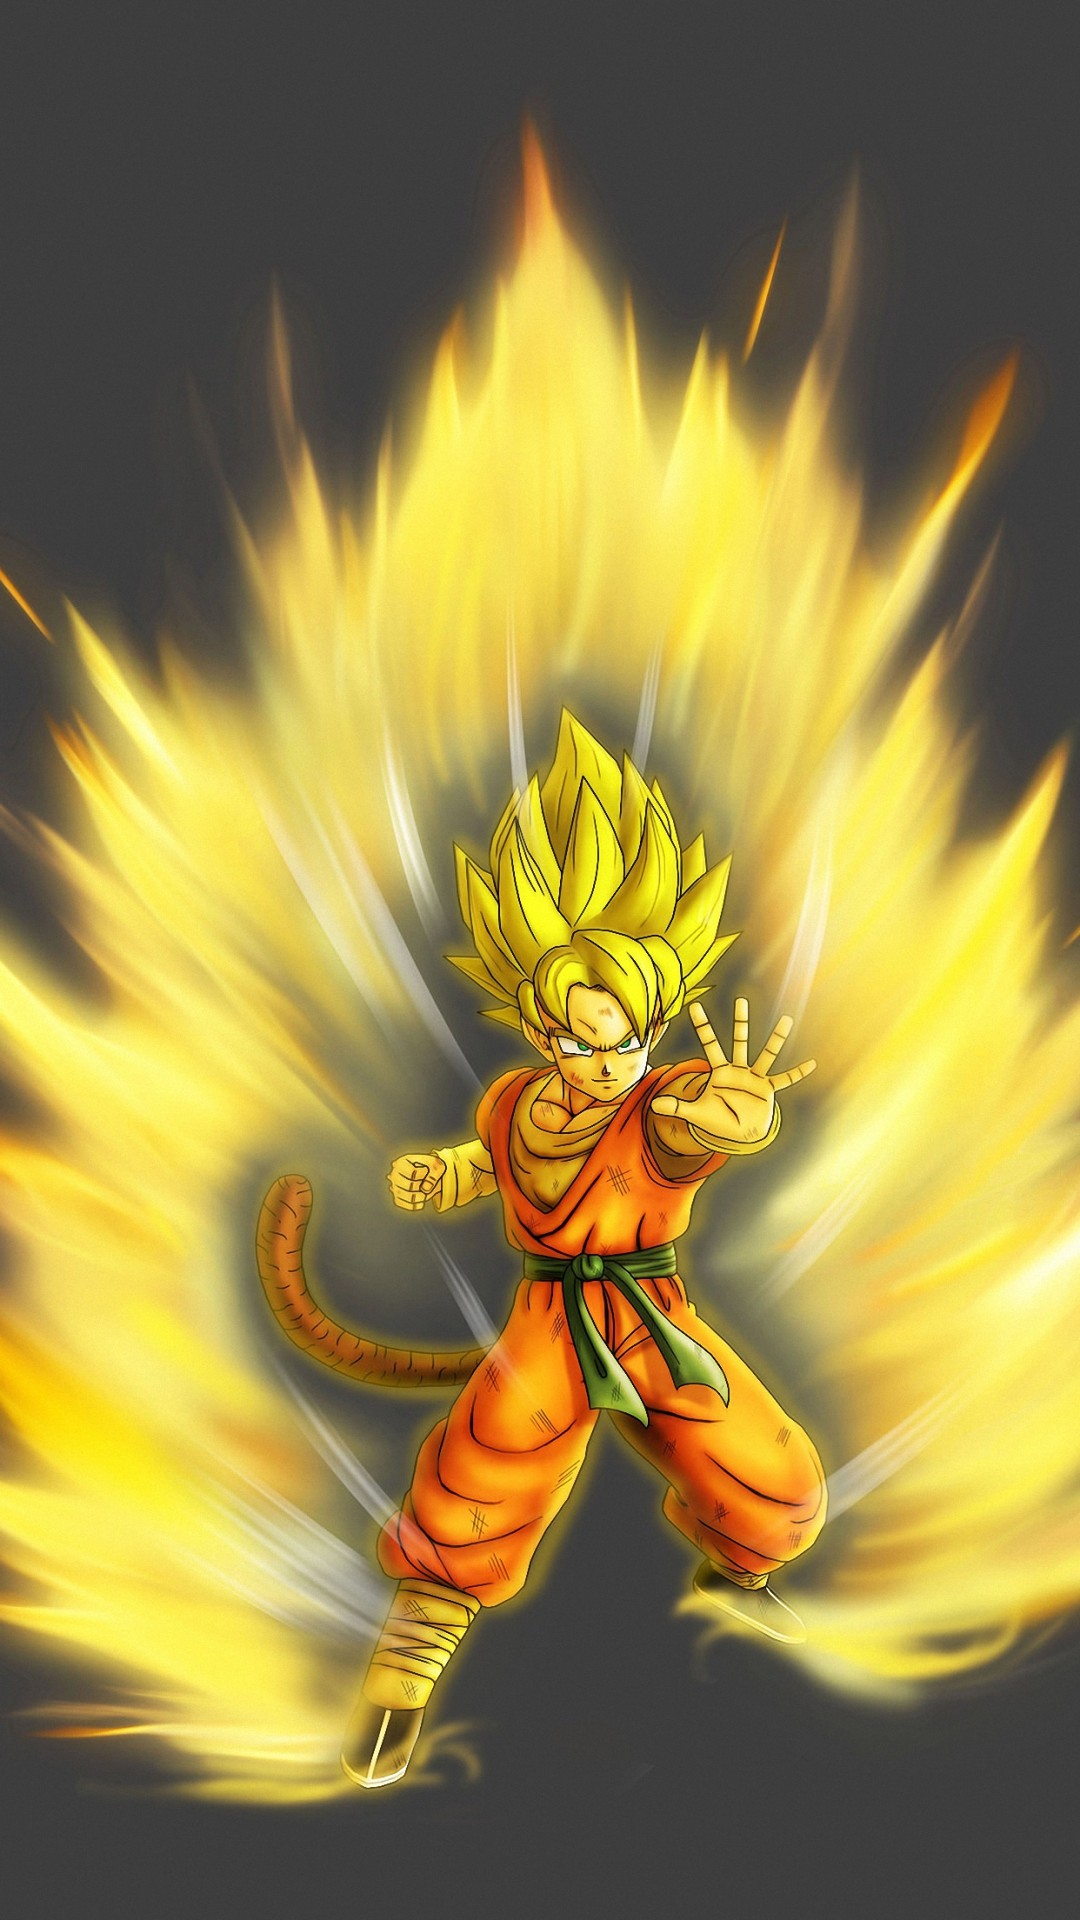 Dragon Ball Z IPhone Wallpaper and HD Background free download on PicGaGa